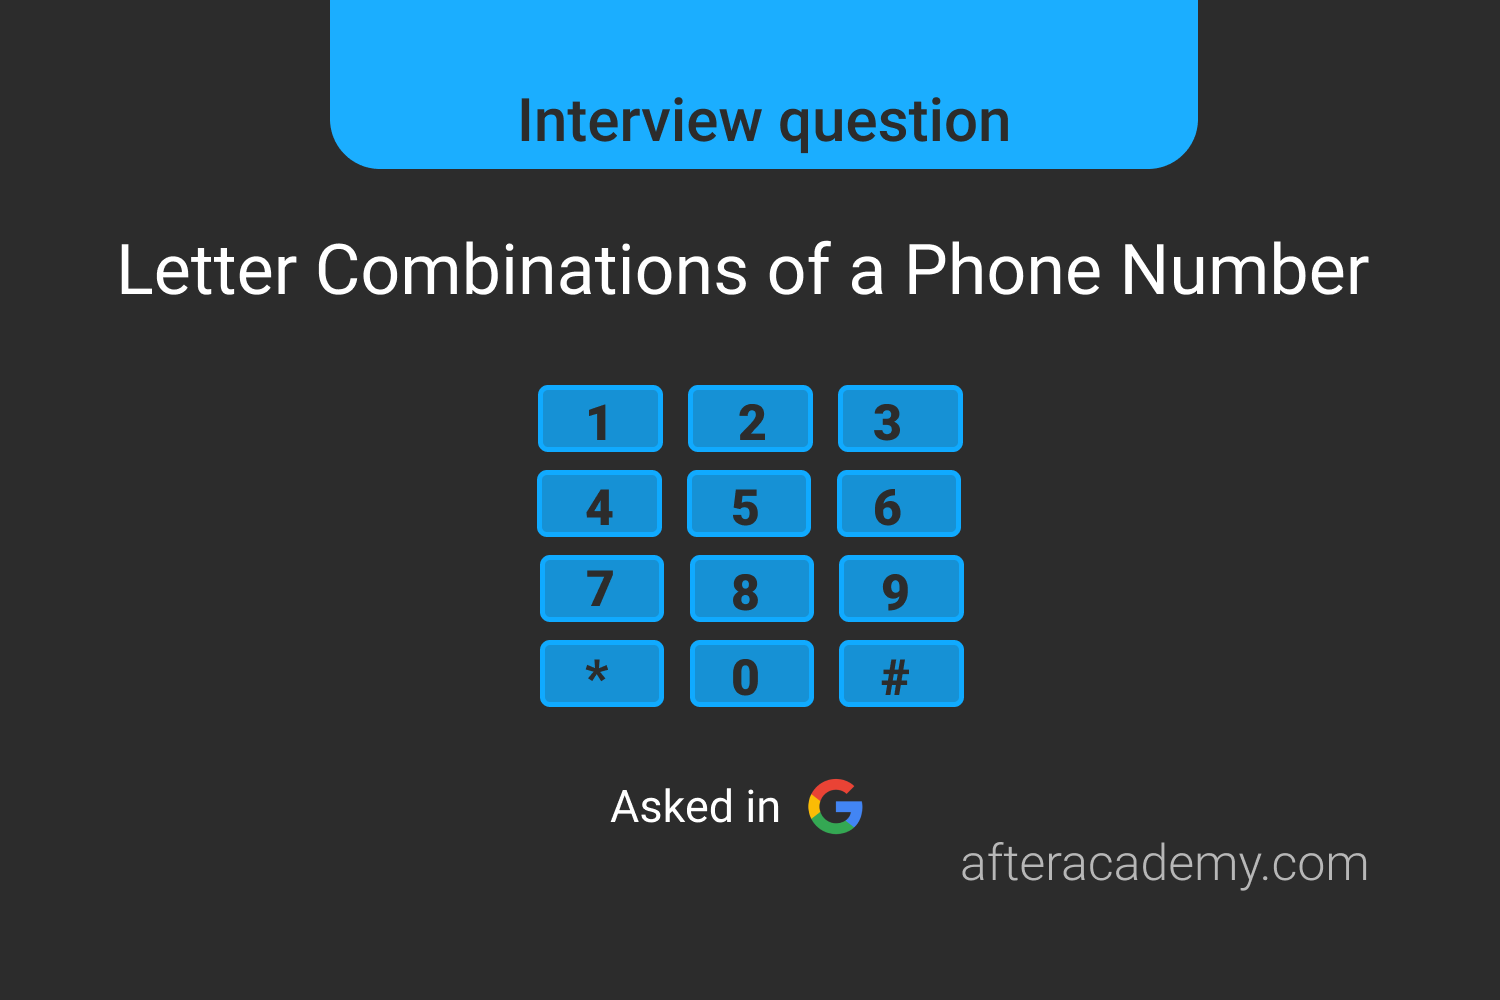 Letter Combinations of a Phone Number